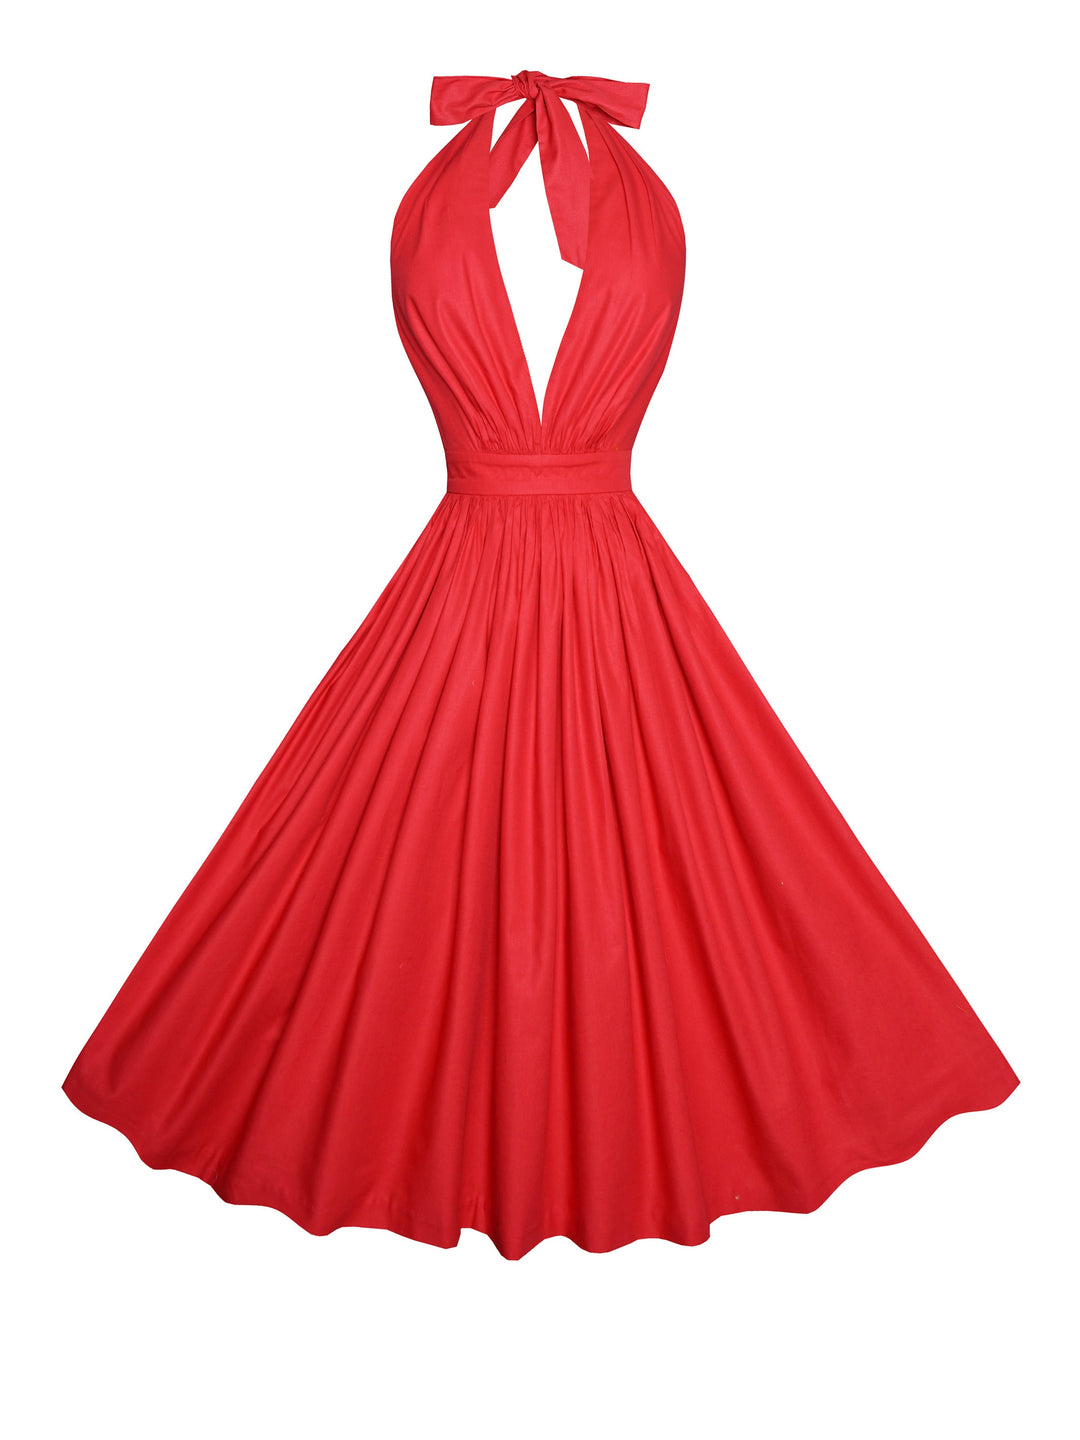 RTS - Size L - Charlotte Dress in Cardinal Red Cotton